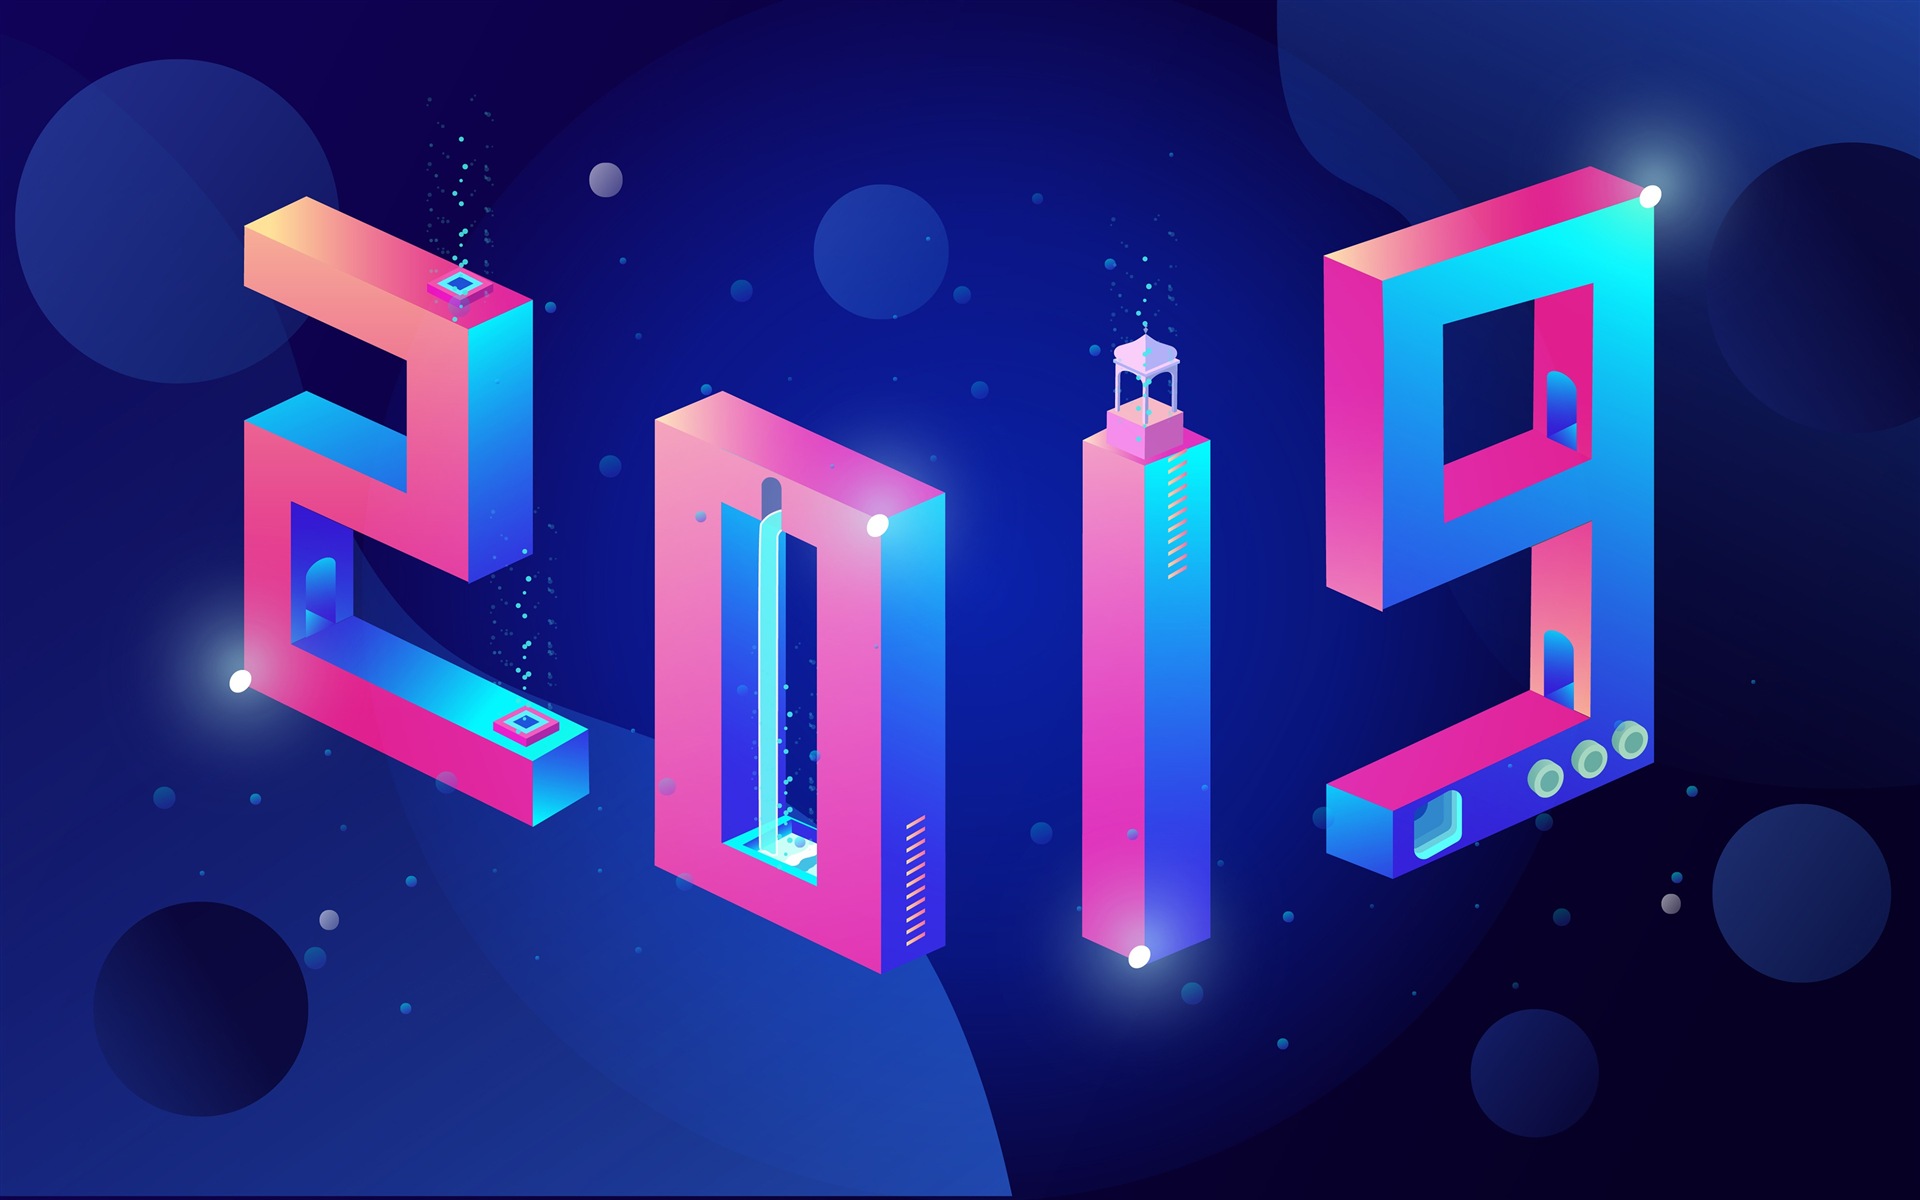 Happy New Year 2019 HD wallpapers #1 - 1920x1200